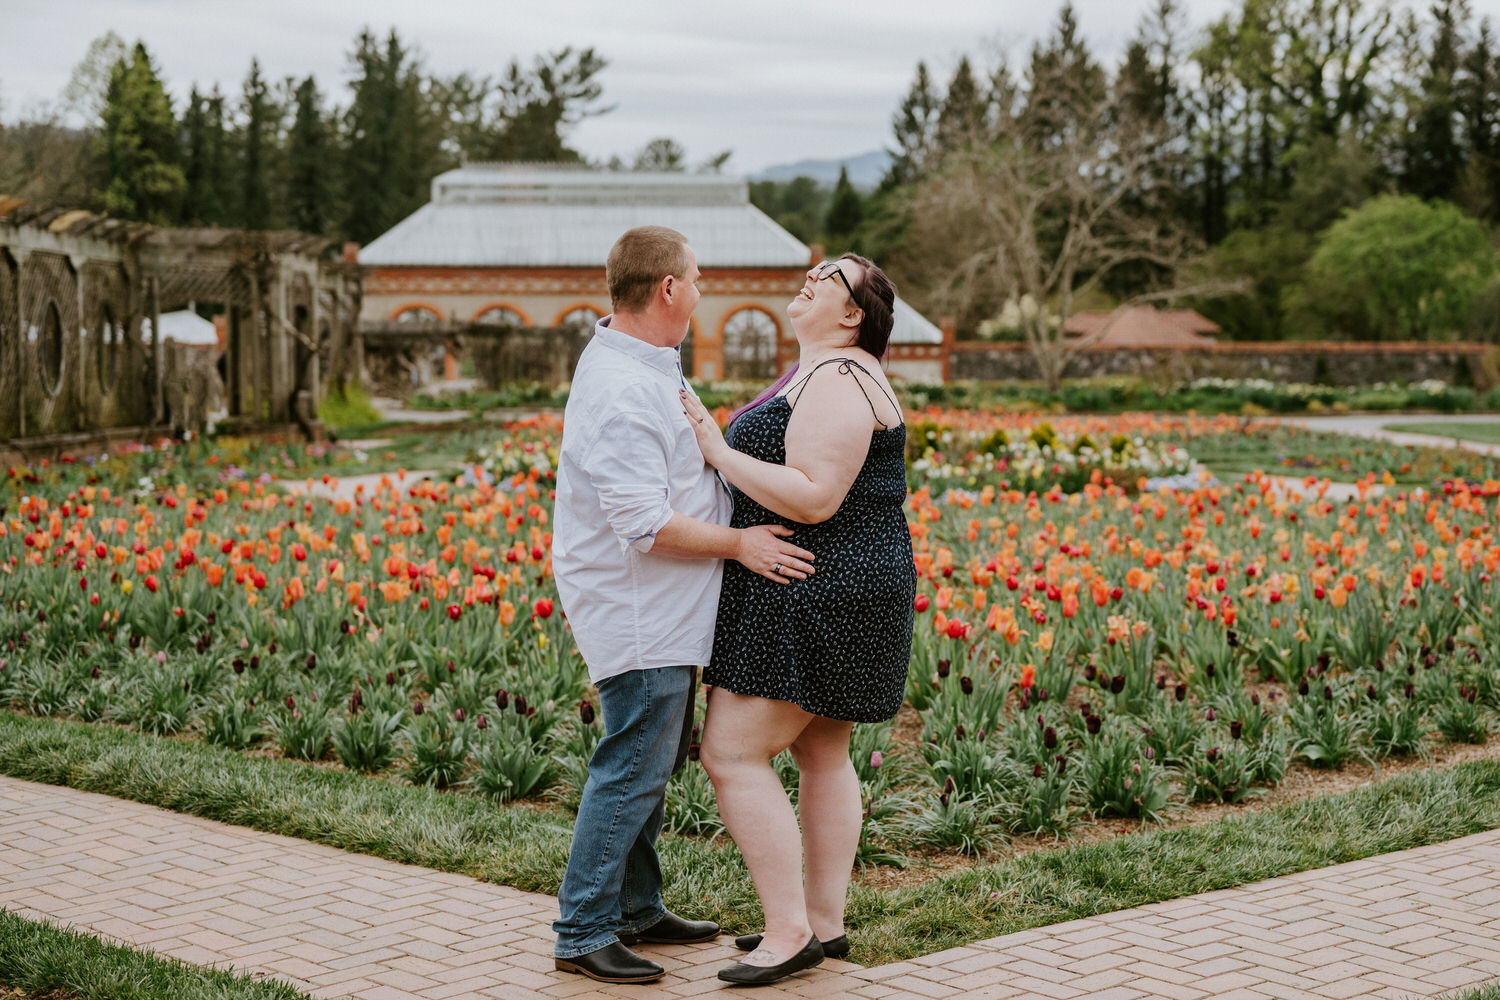 Biltmore estate engagement photos featuring a couple laughing with their arms around each other in a colorful garden.